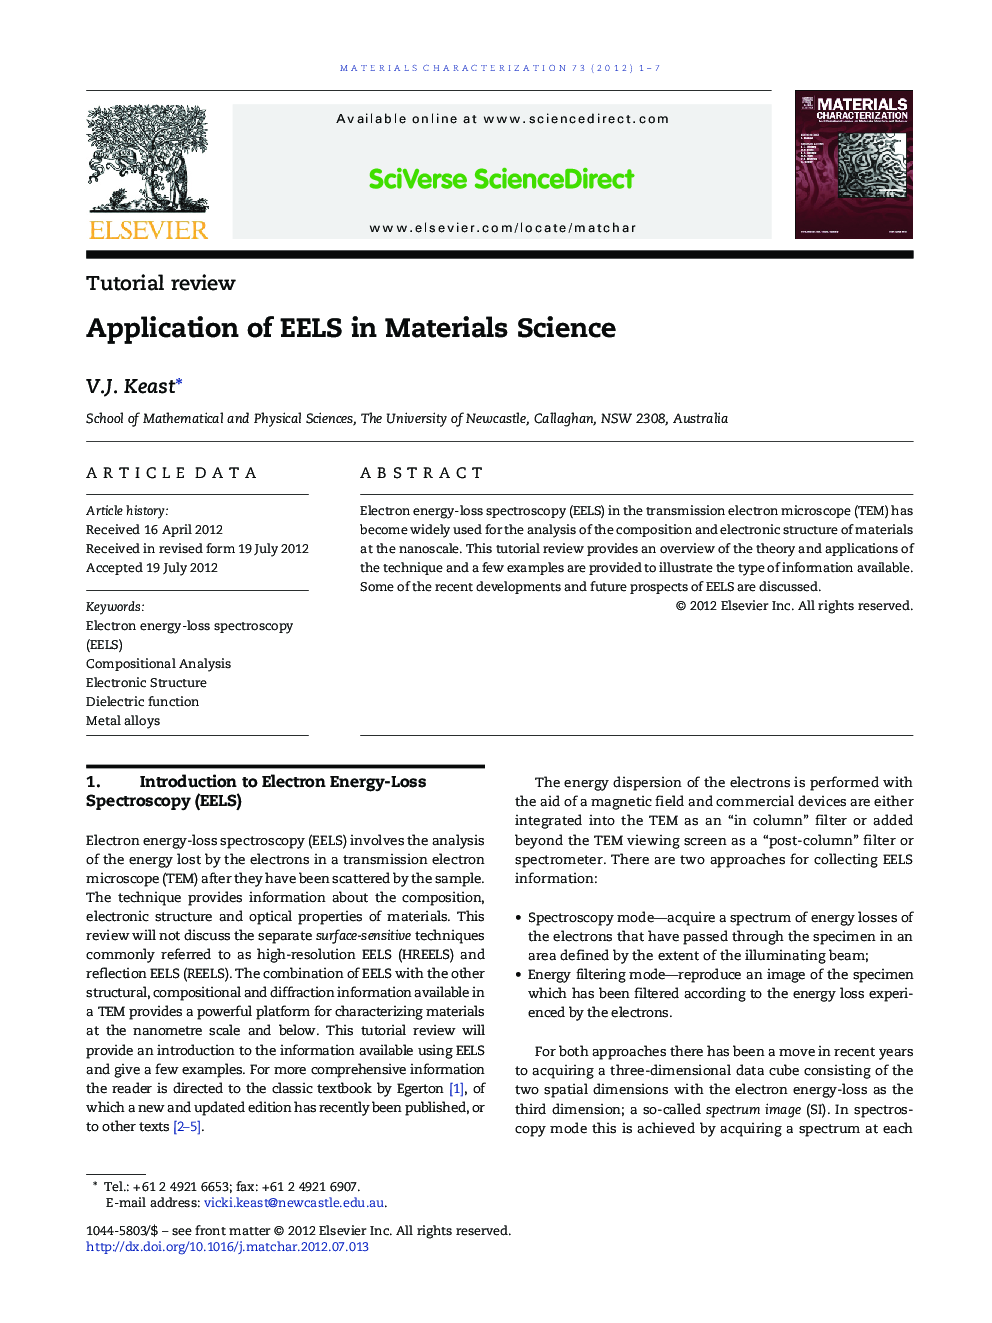 Application of EELS in Materials Science